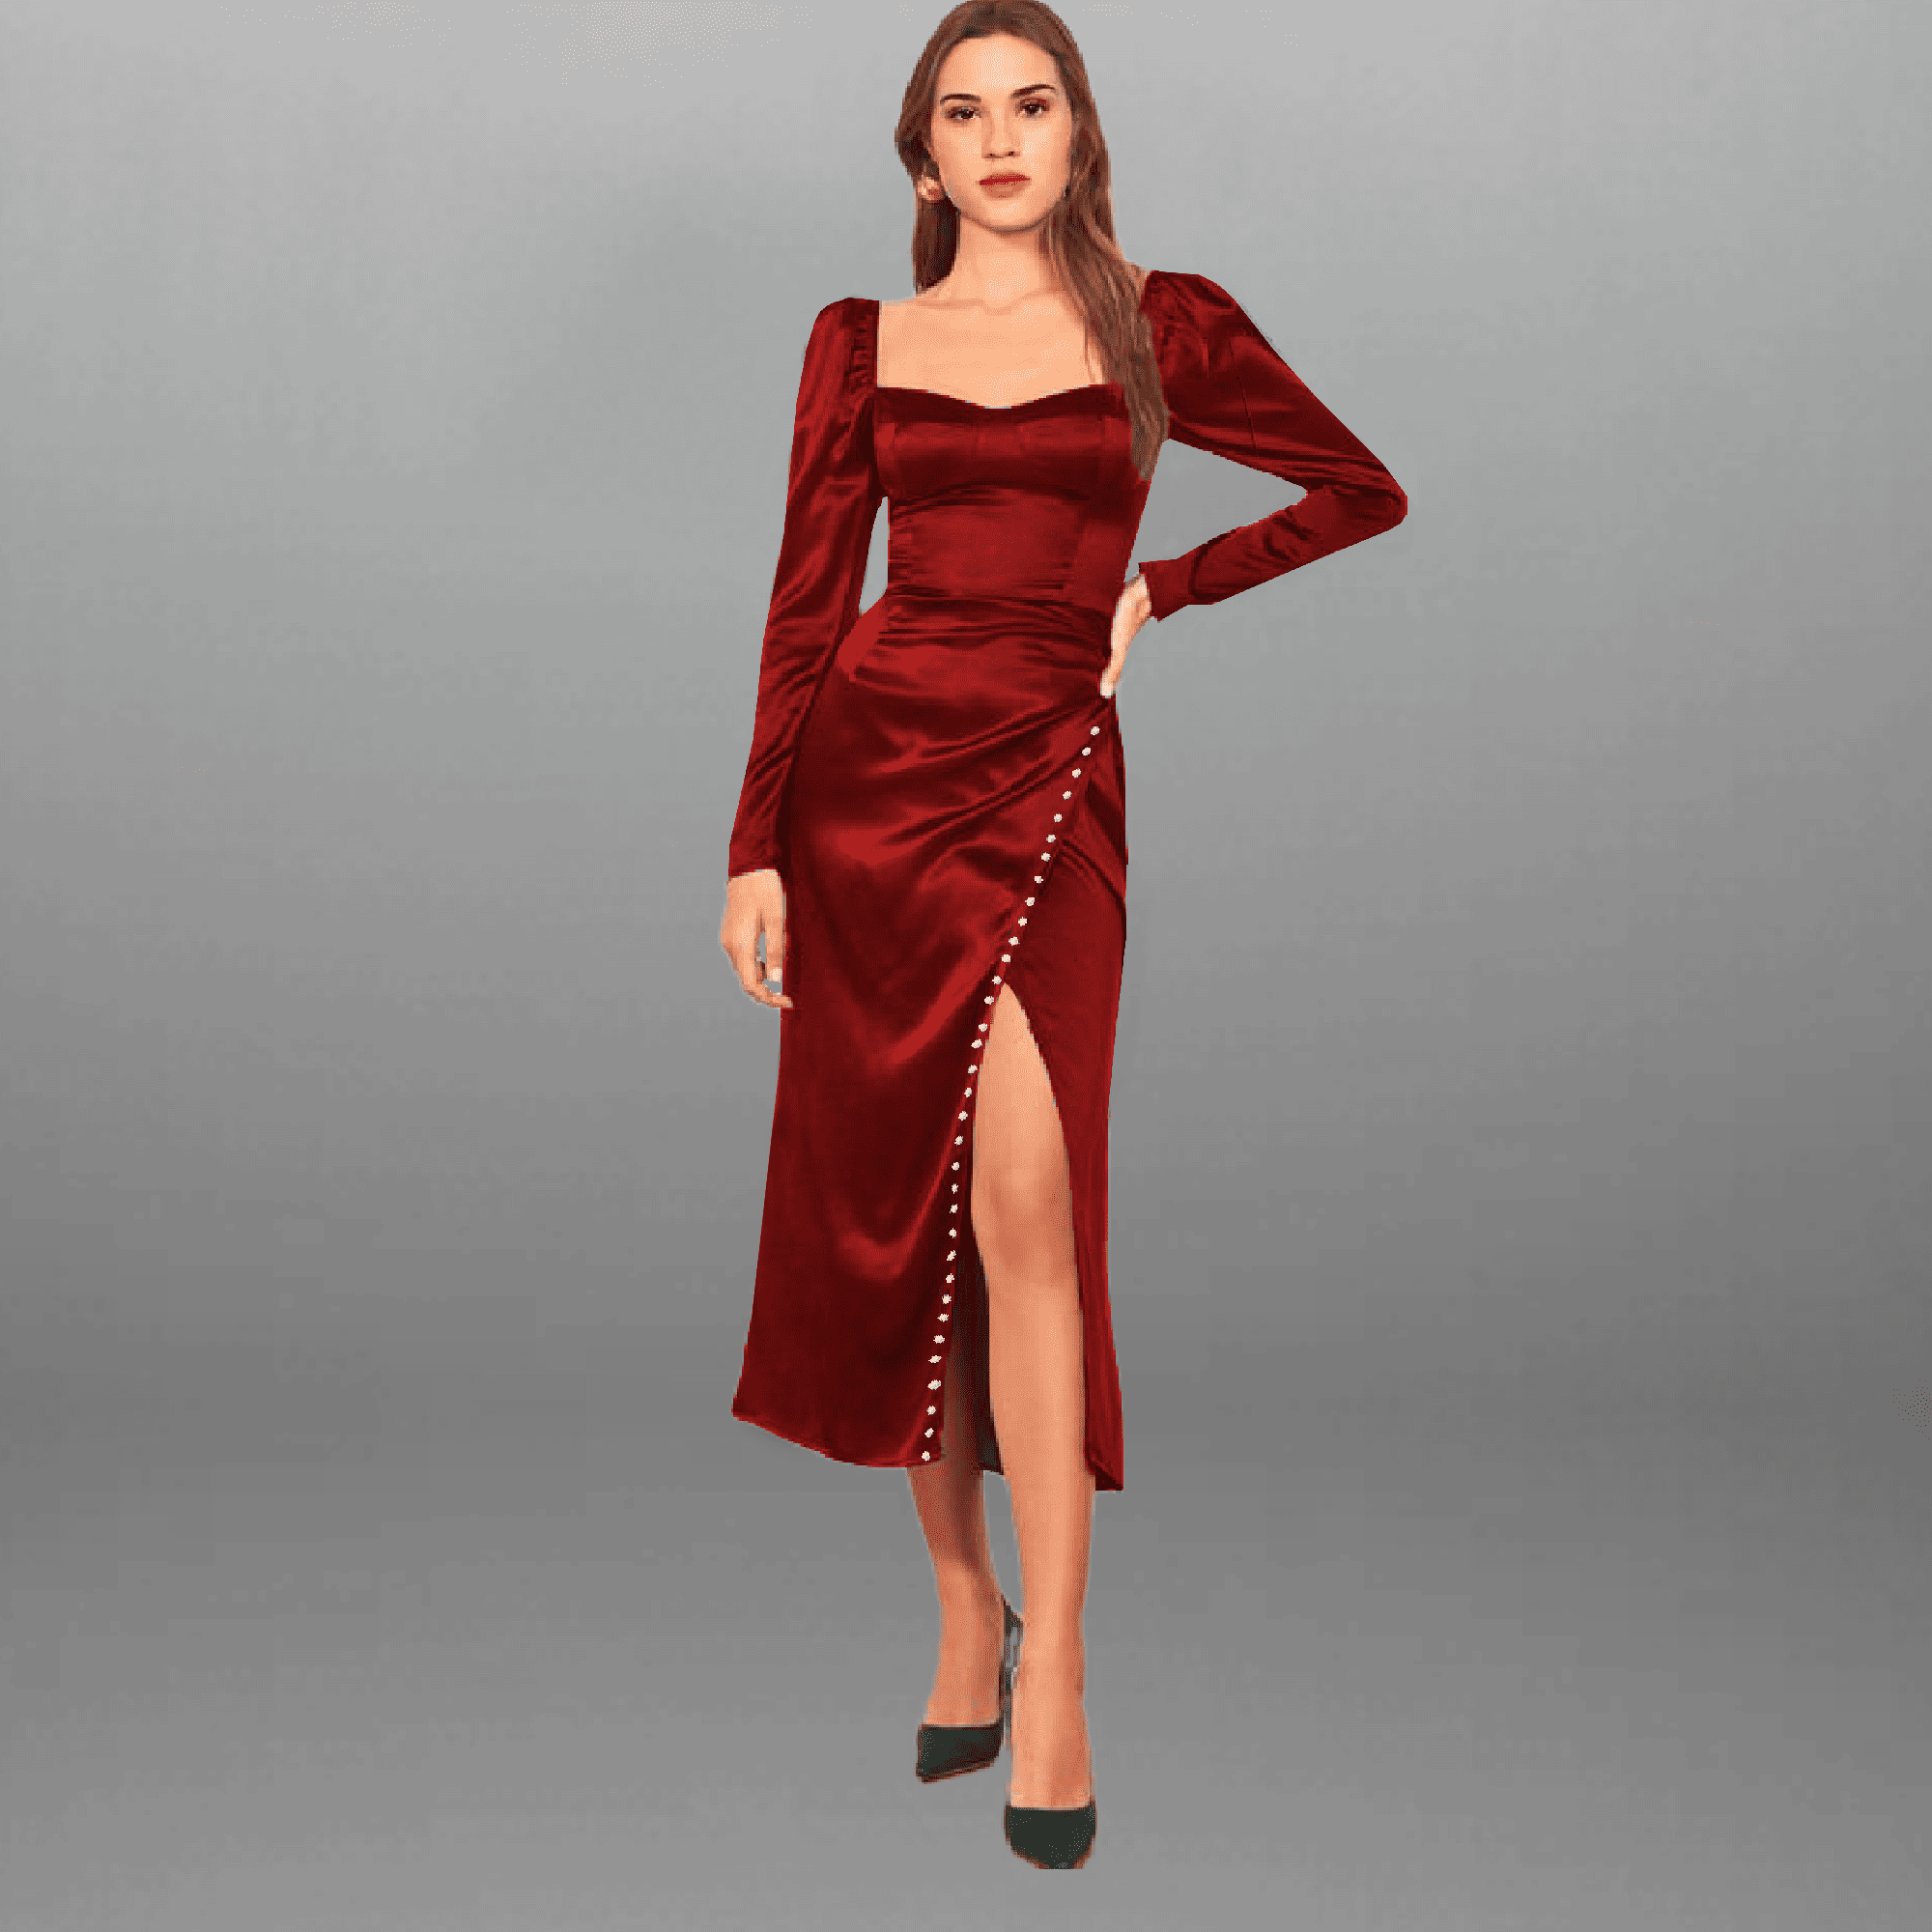 Women's Red Satin Full sleeve Overlapped dress with Pearl Embellishment-RED066